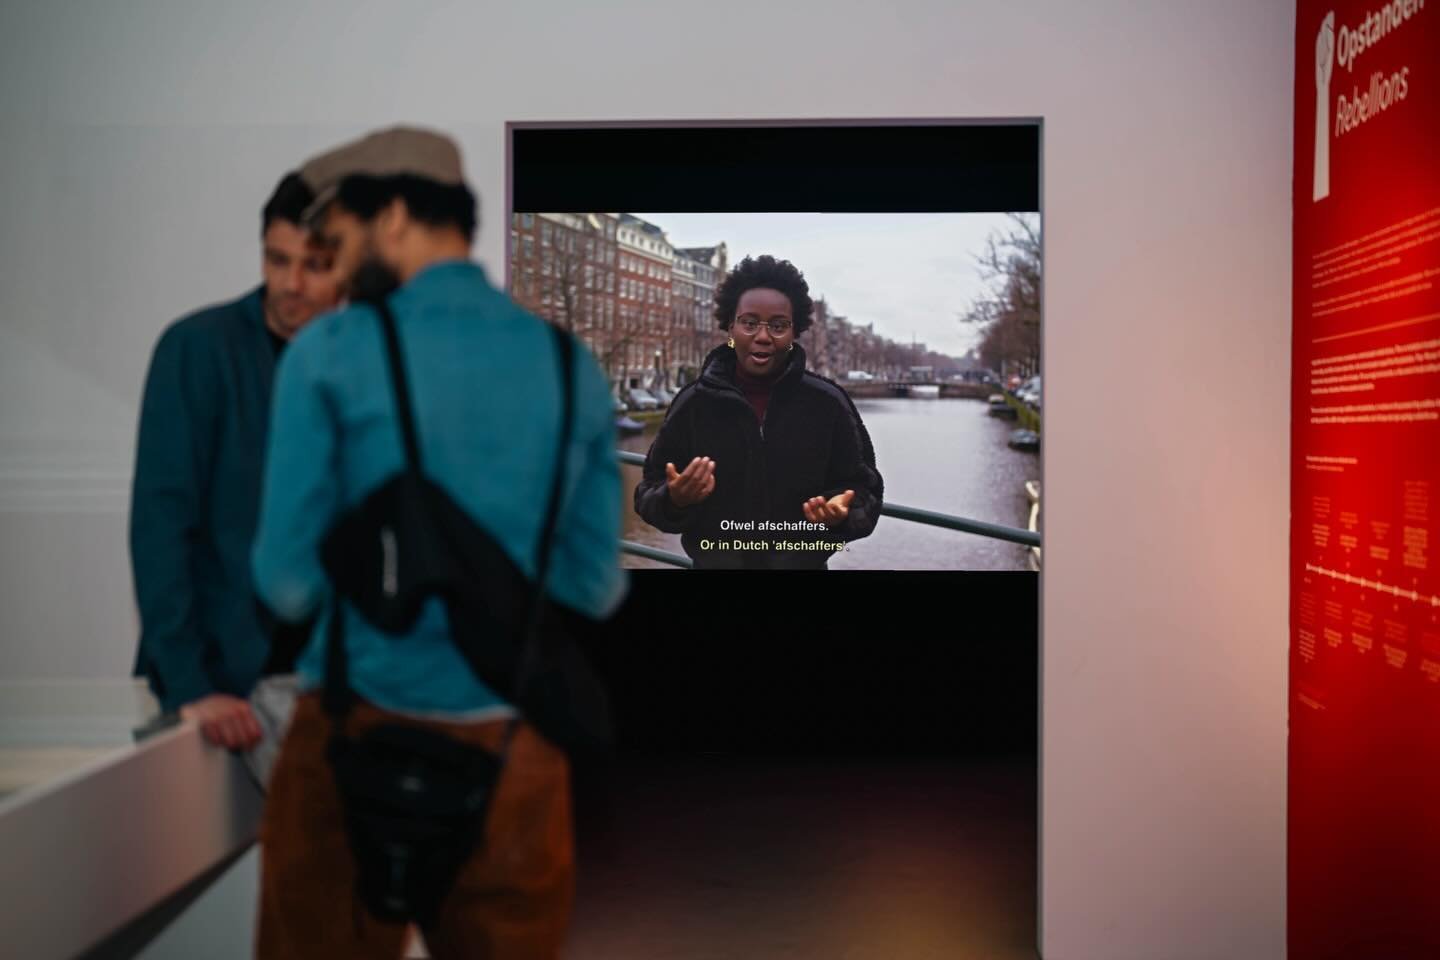 The National Slavery Museum is set to open in 2028. Until then, they are creating temporary &lsquo;pop-up&rsquo; exhibitions in different locations. The first one, &ldquo;Resistance against Slavery&rdquo;, opened last week, exploring both the resista